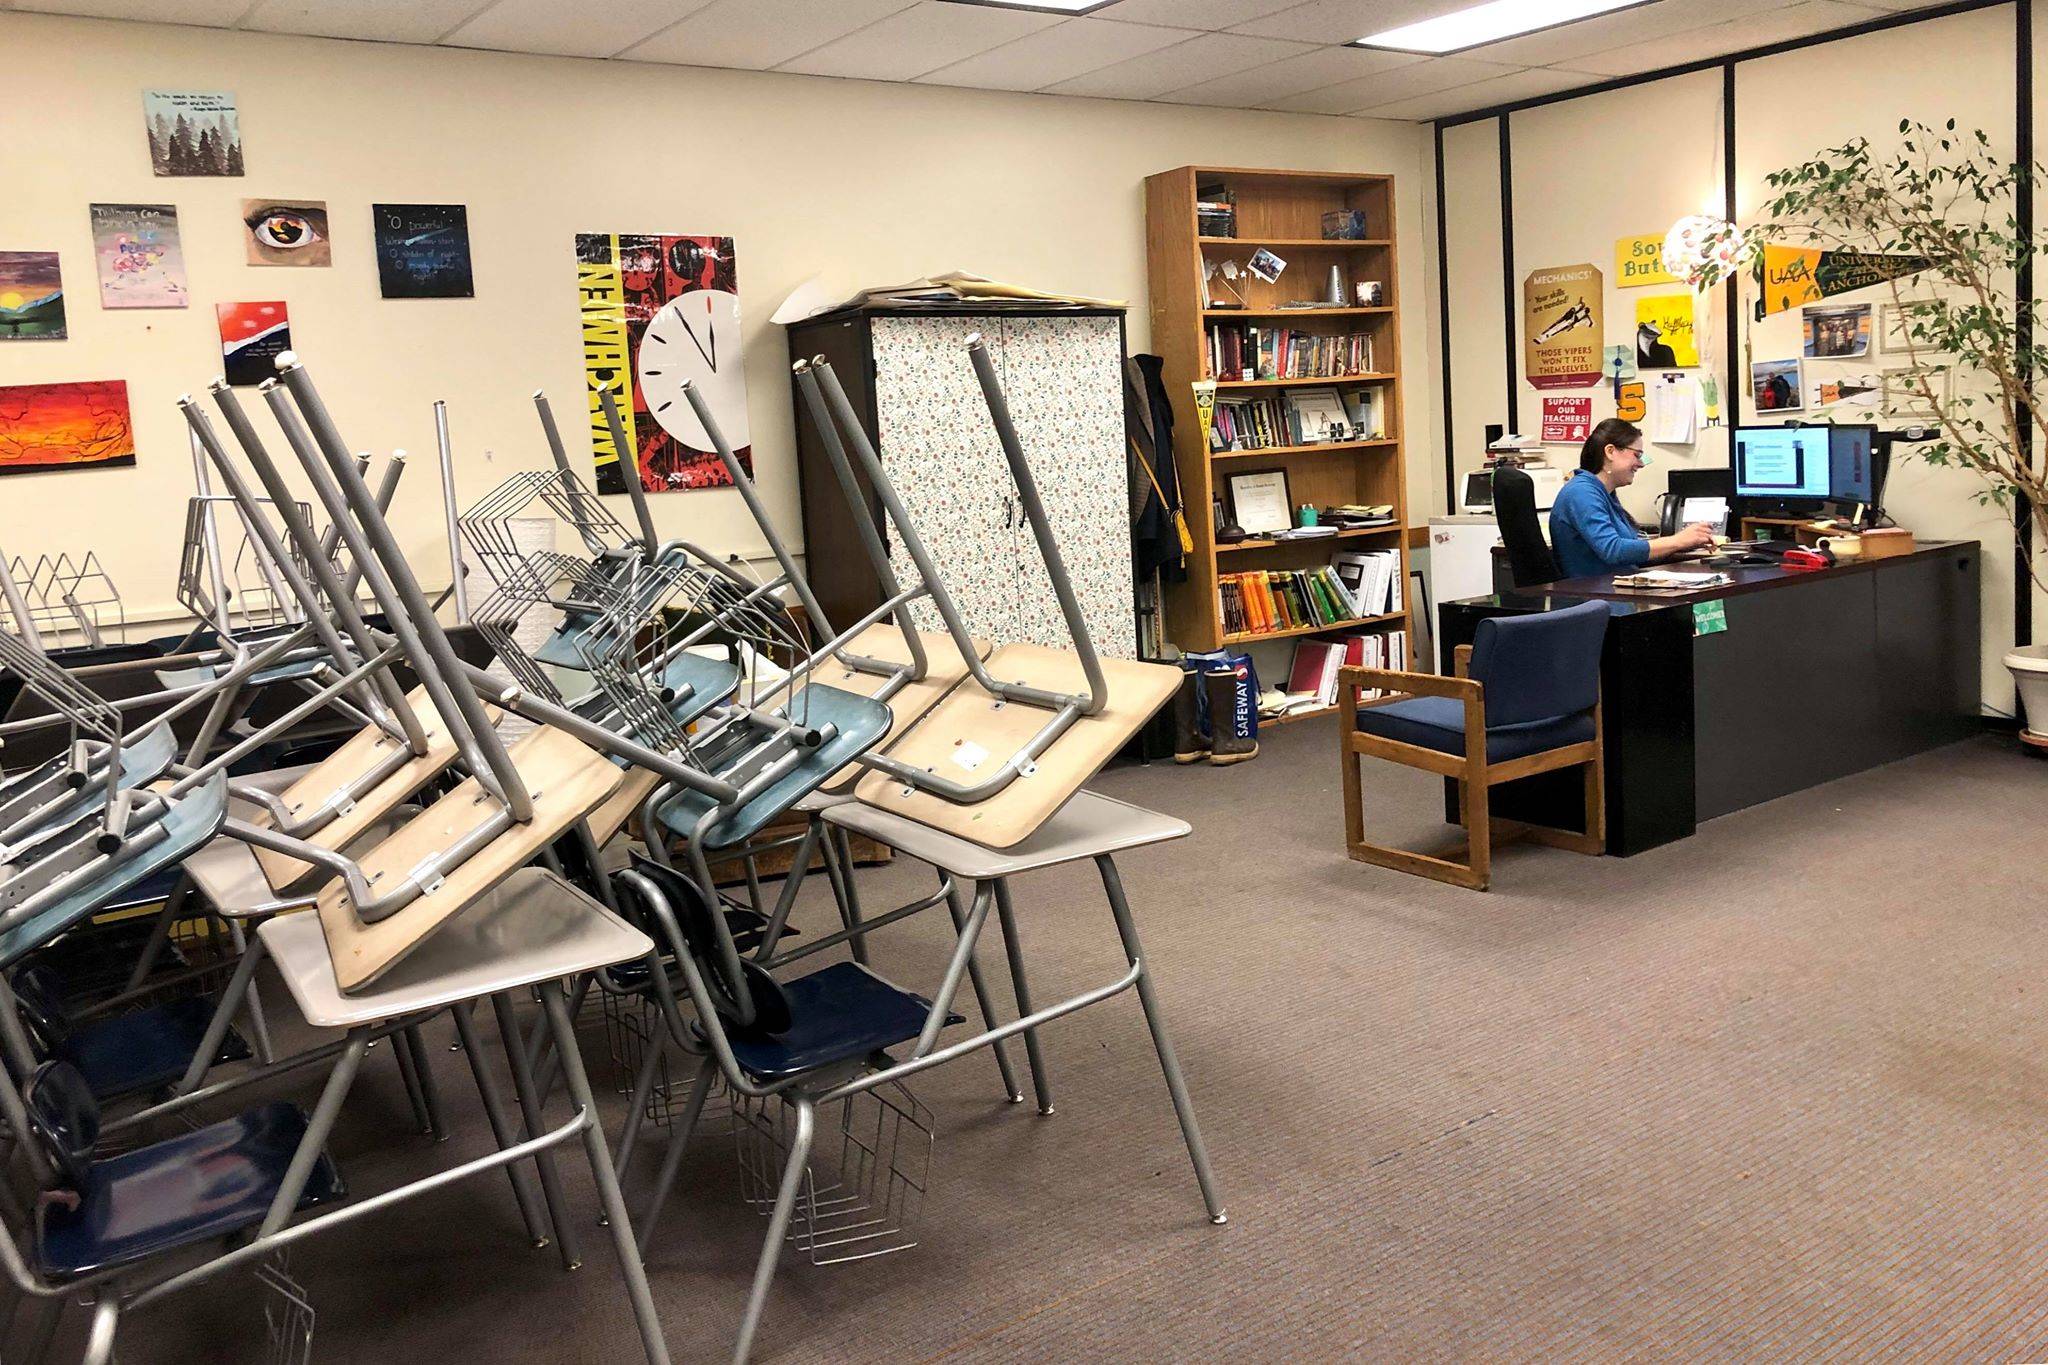 Soldotna High School English teacher Nicole Hewitt teaches her students remotely from her empty classroom at Soldotna High School on Monday, April 6, 2020 in Soldotna, Alaska. (Photo by Victoria Petersen/Peninsula Clarion)